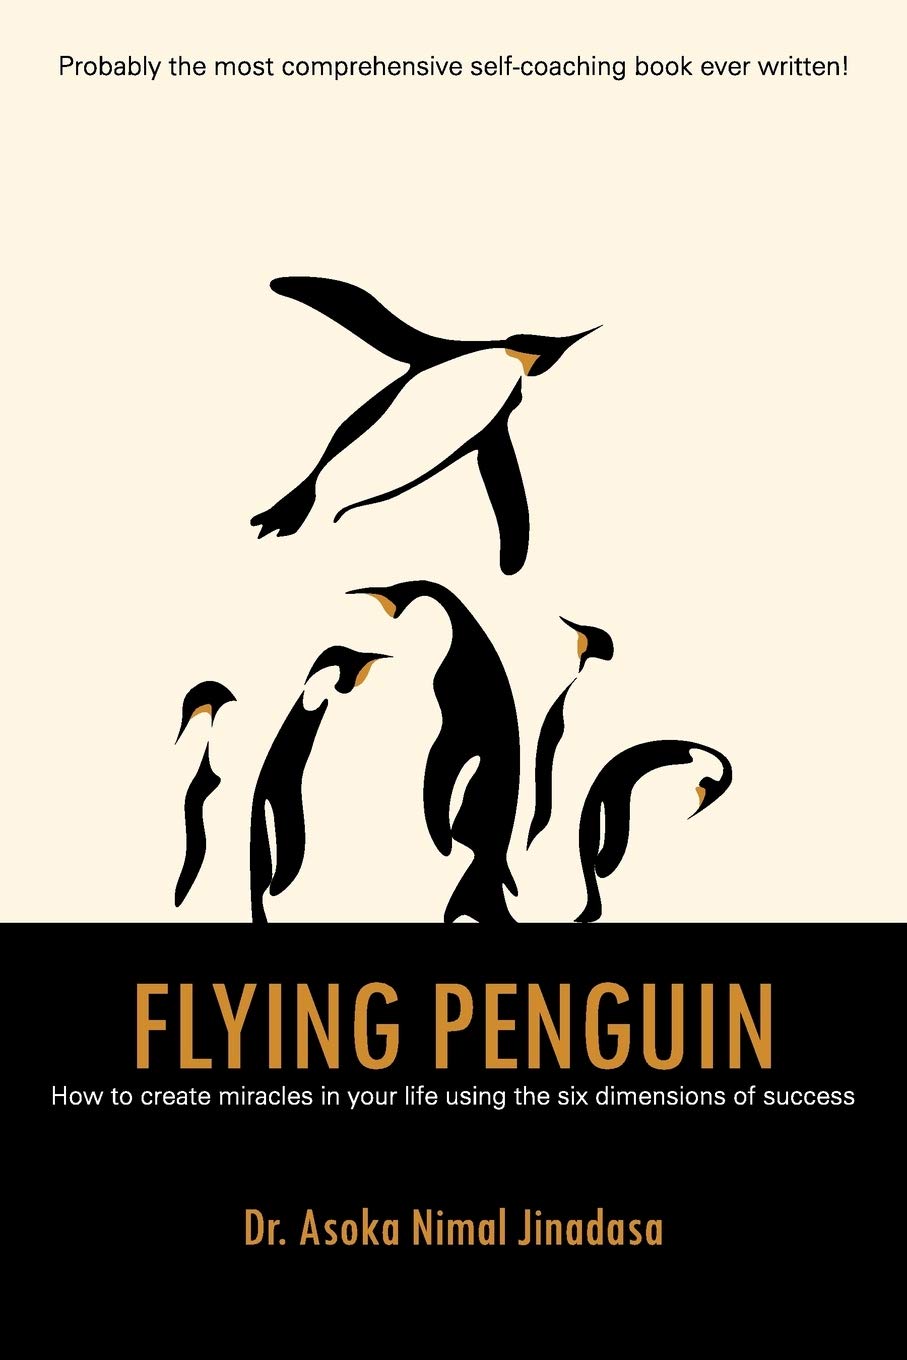 Flying Penguin How to create miracles i your life using the six dimensions of success